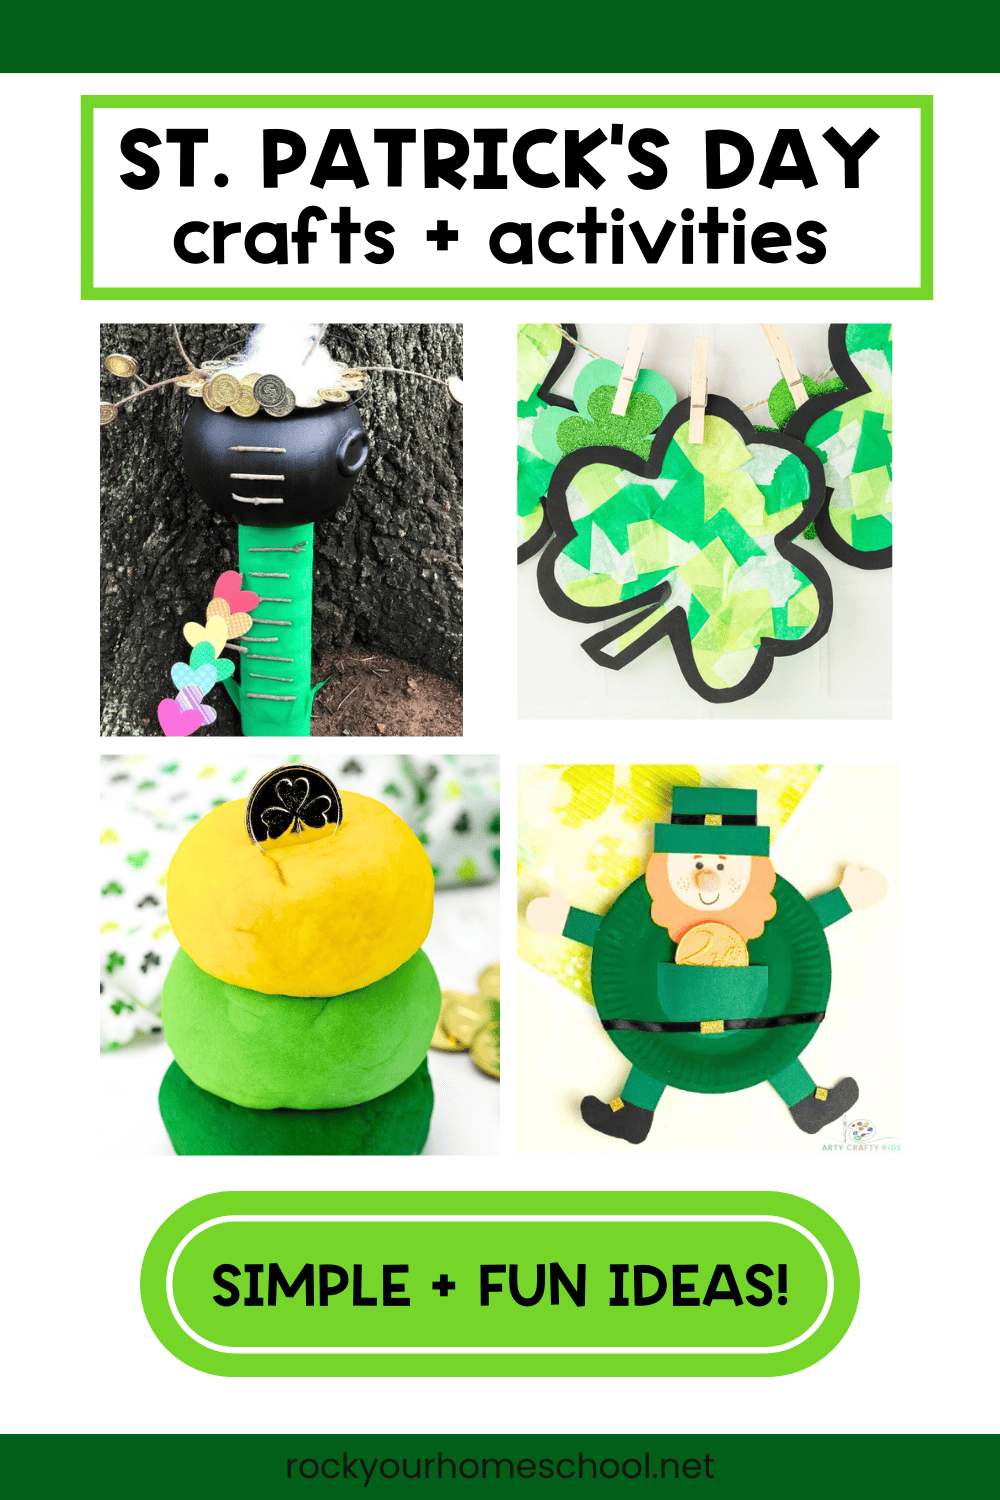 Examples of simple St Patrick's Day crafts for kids featuring leprechaun trap, shamrock suncatcher, playdough, and leprechaun paper plate craft.